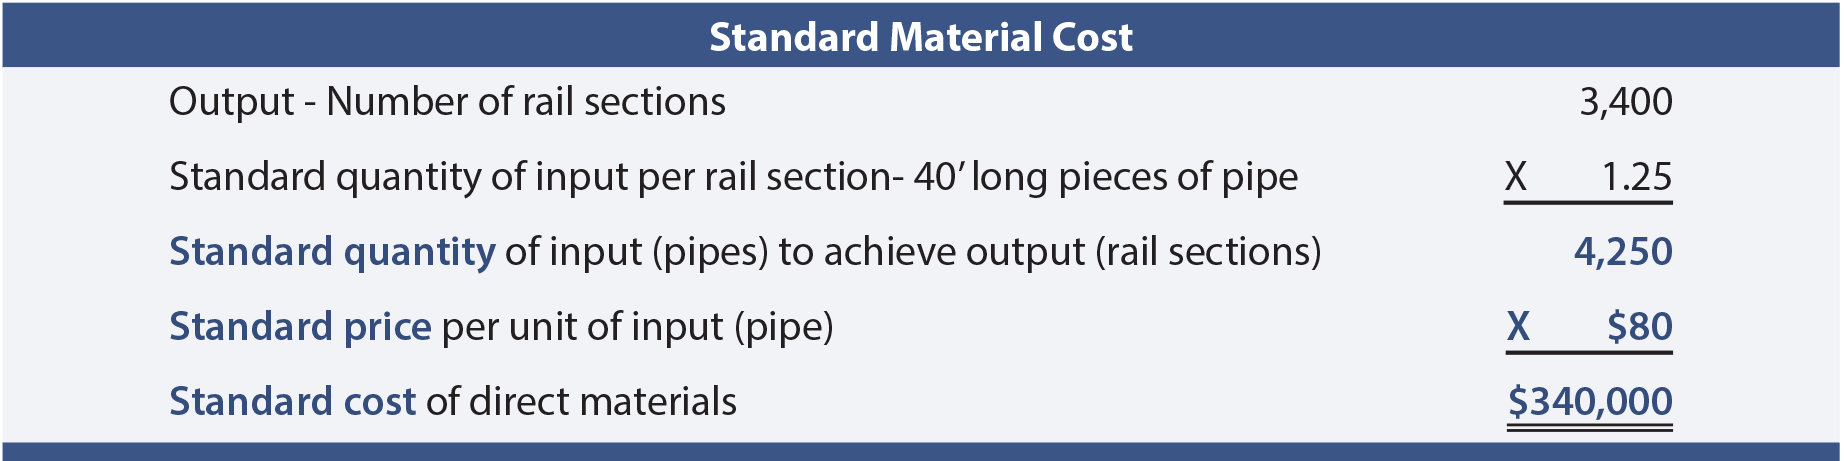 Standard Material Cost